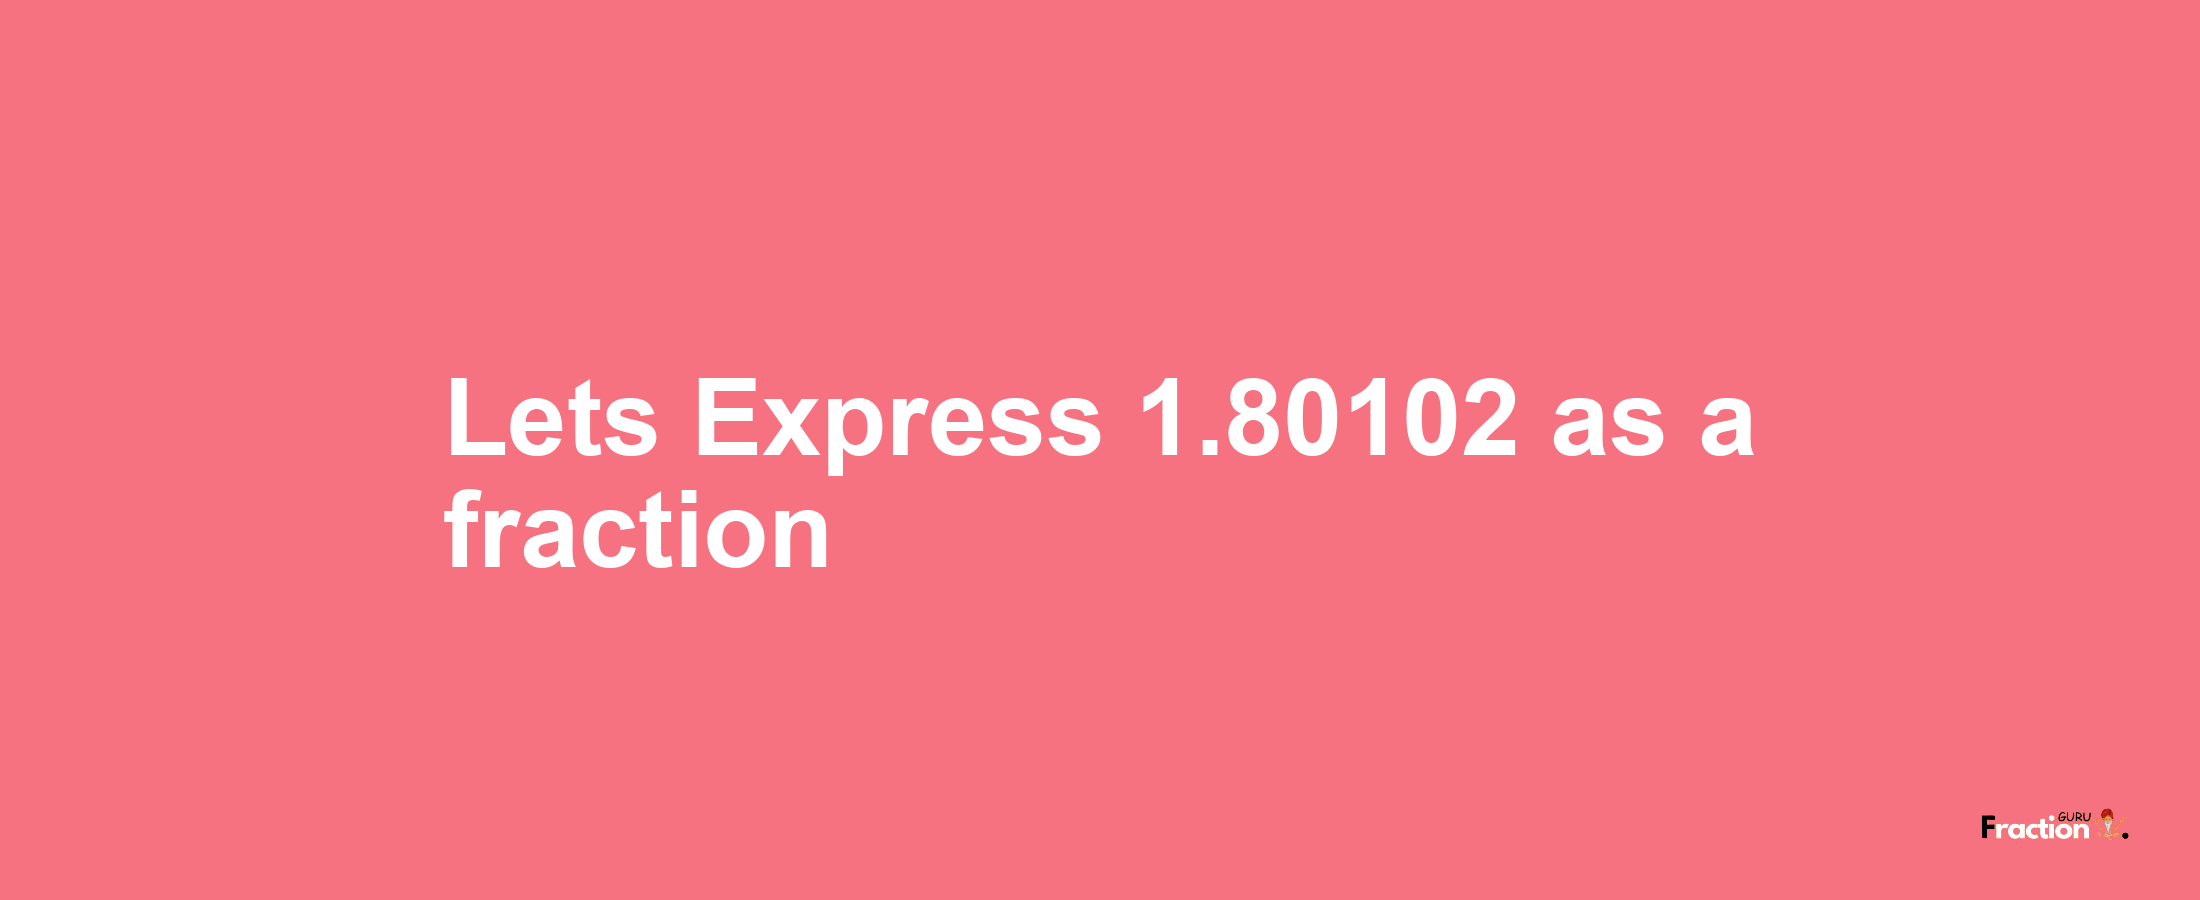 Lets Express 1.80102 as afraction